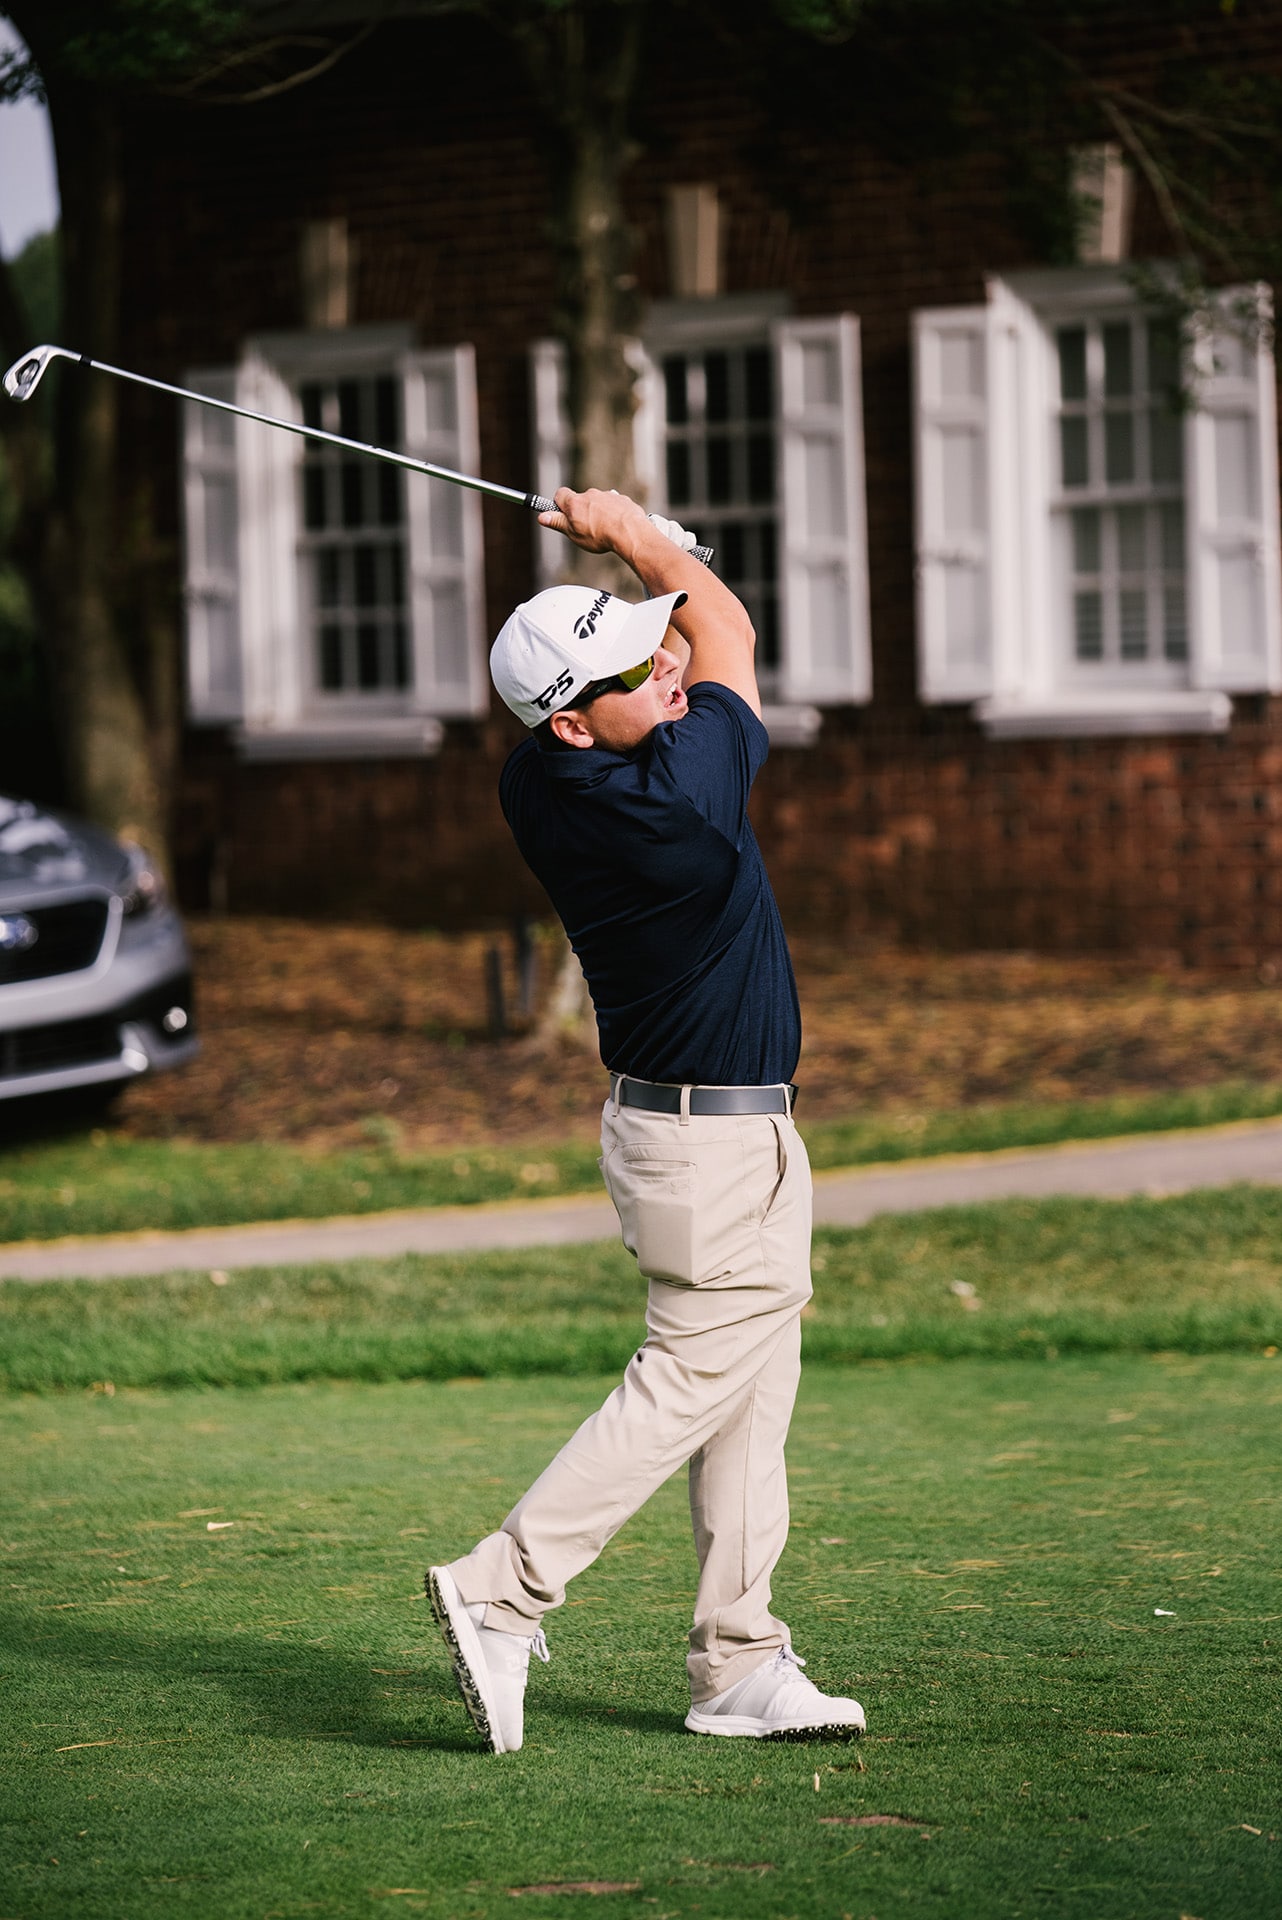 On October 7th, 2019 Community Options, Inc. hosted its golf outing at TPC Jasna Polana in Princeton, New Jersey.